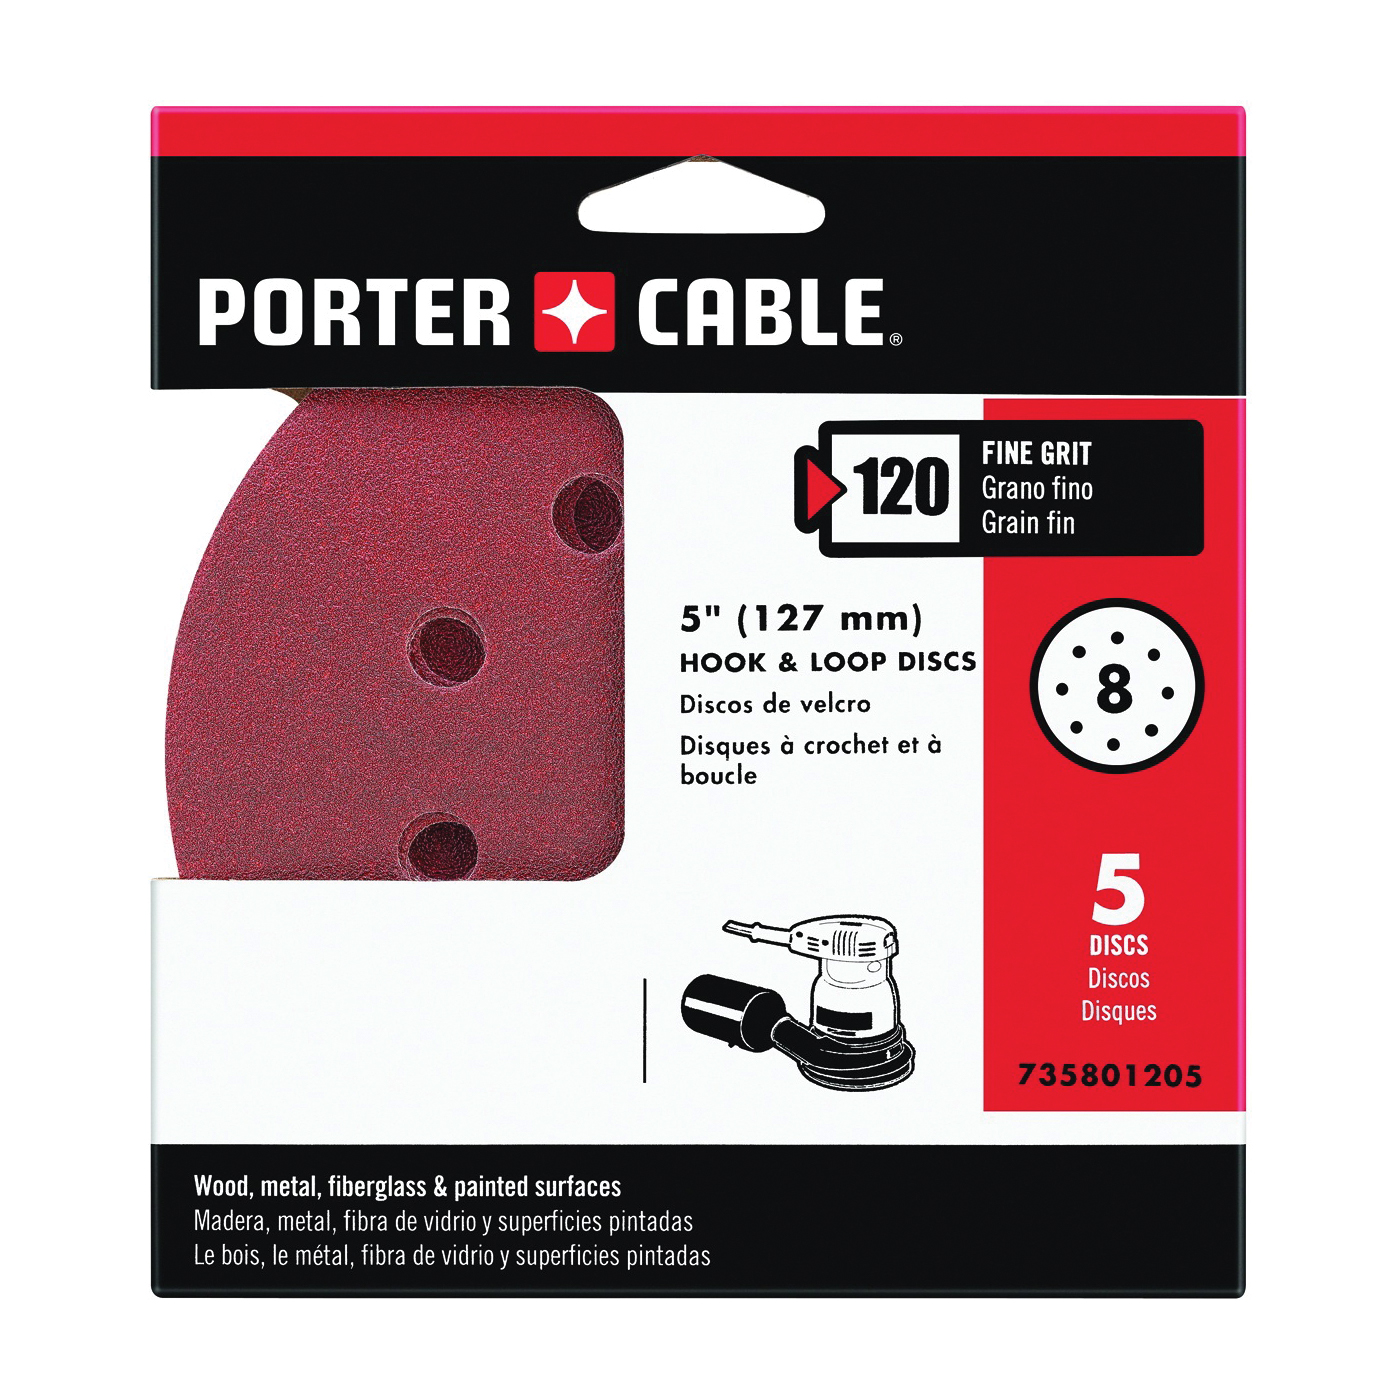 Porter-cable 735801205